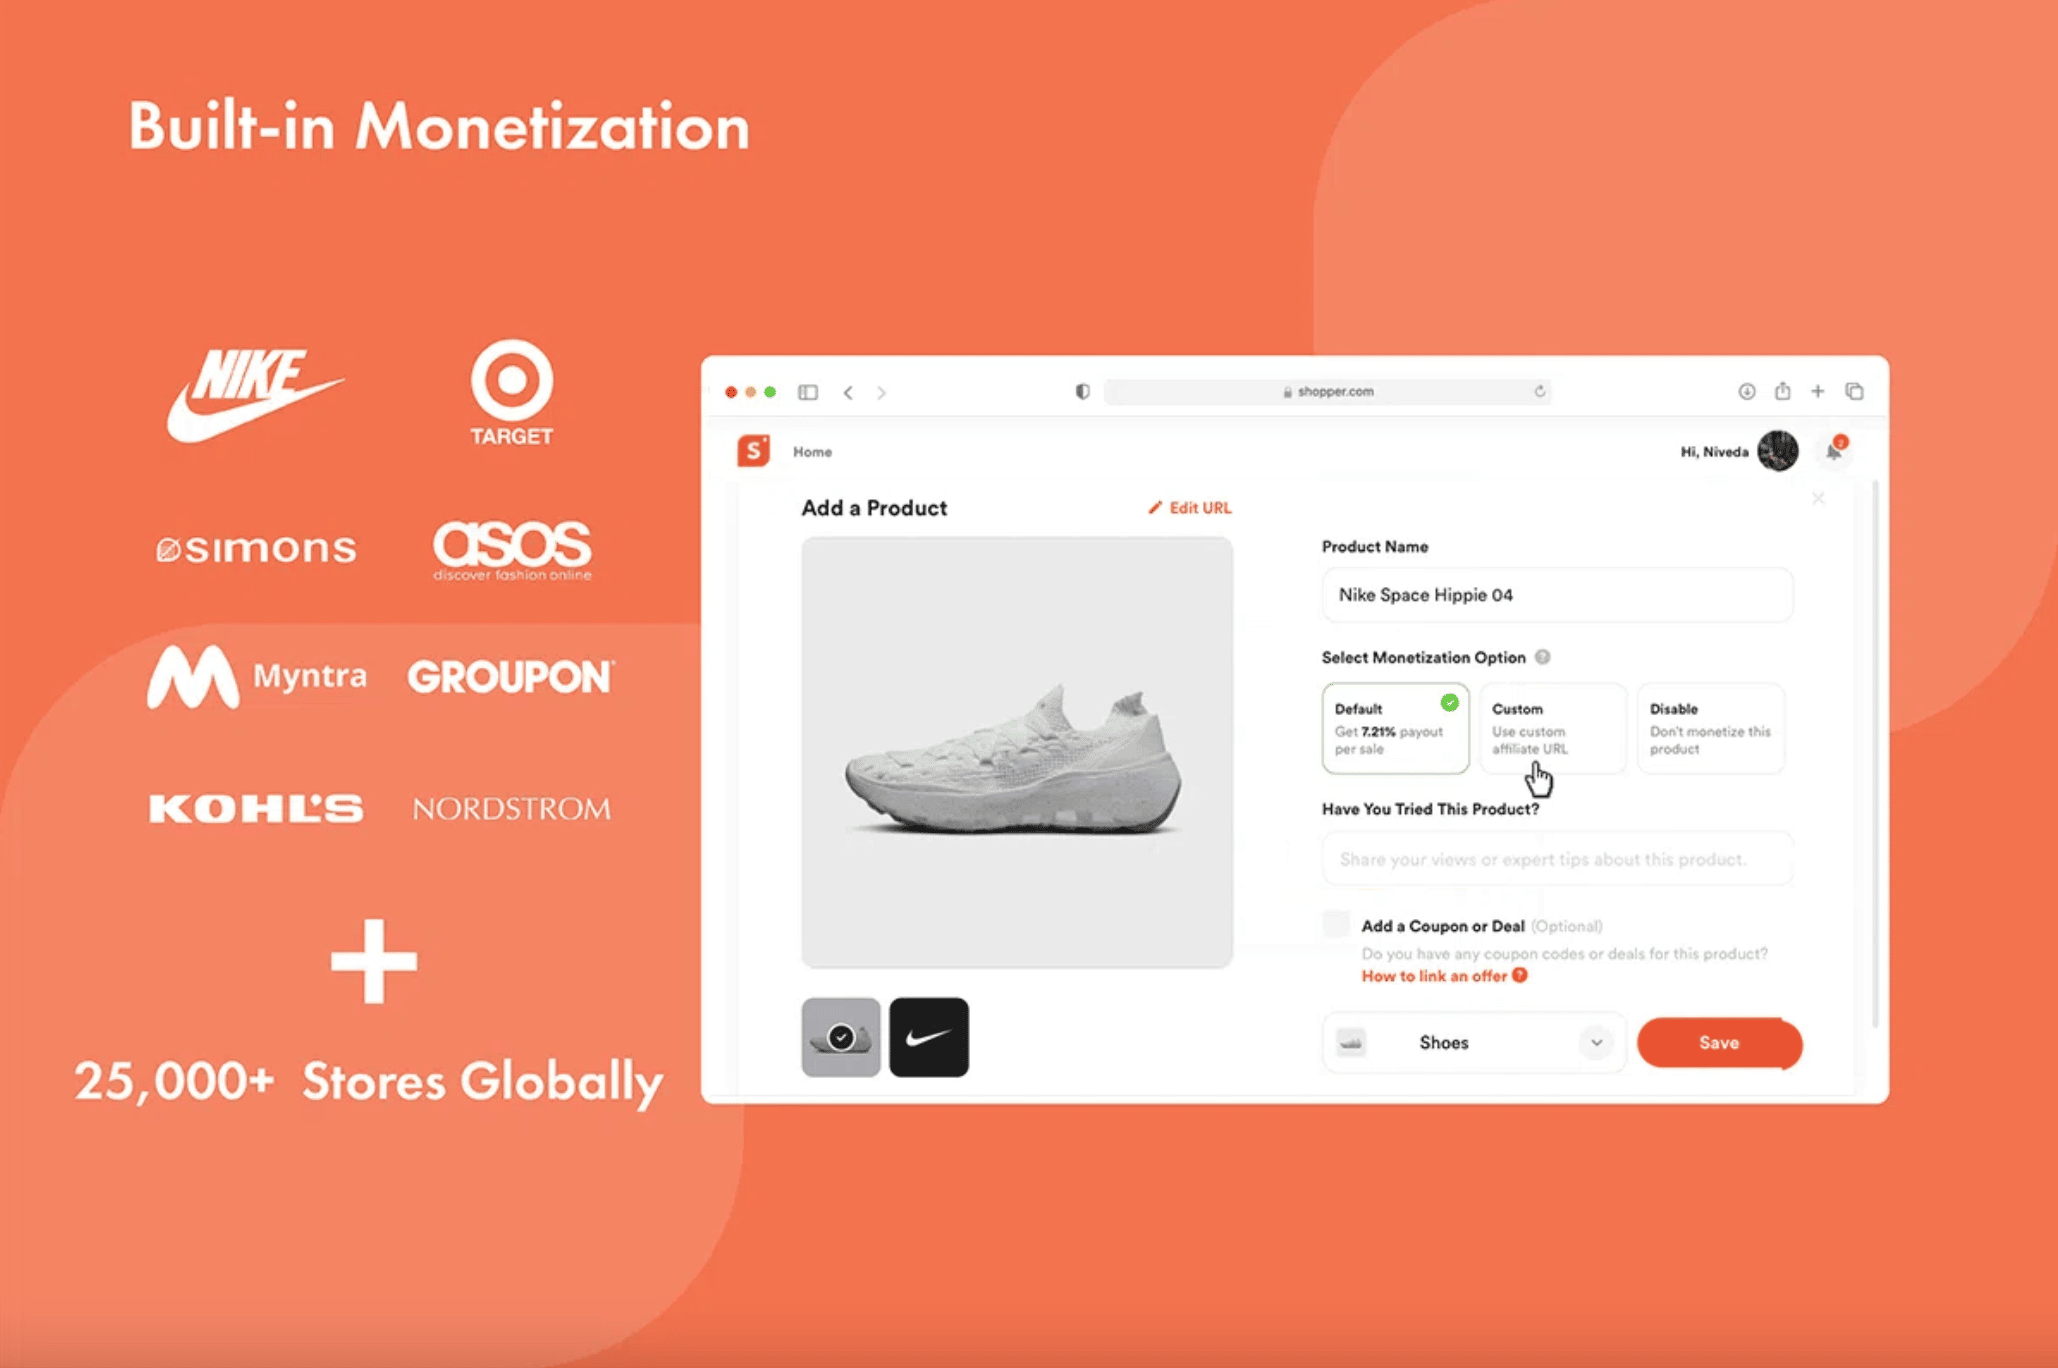 shopper.com illustration, brands on the left and a screenshot of a nike product on the right